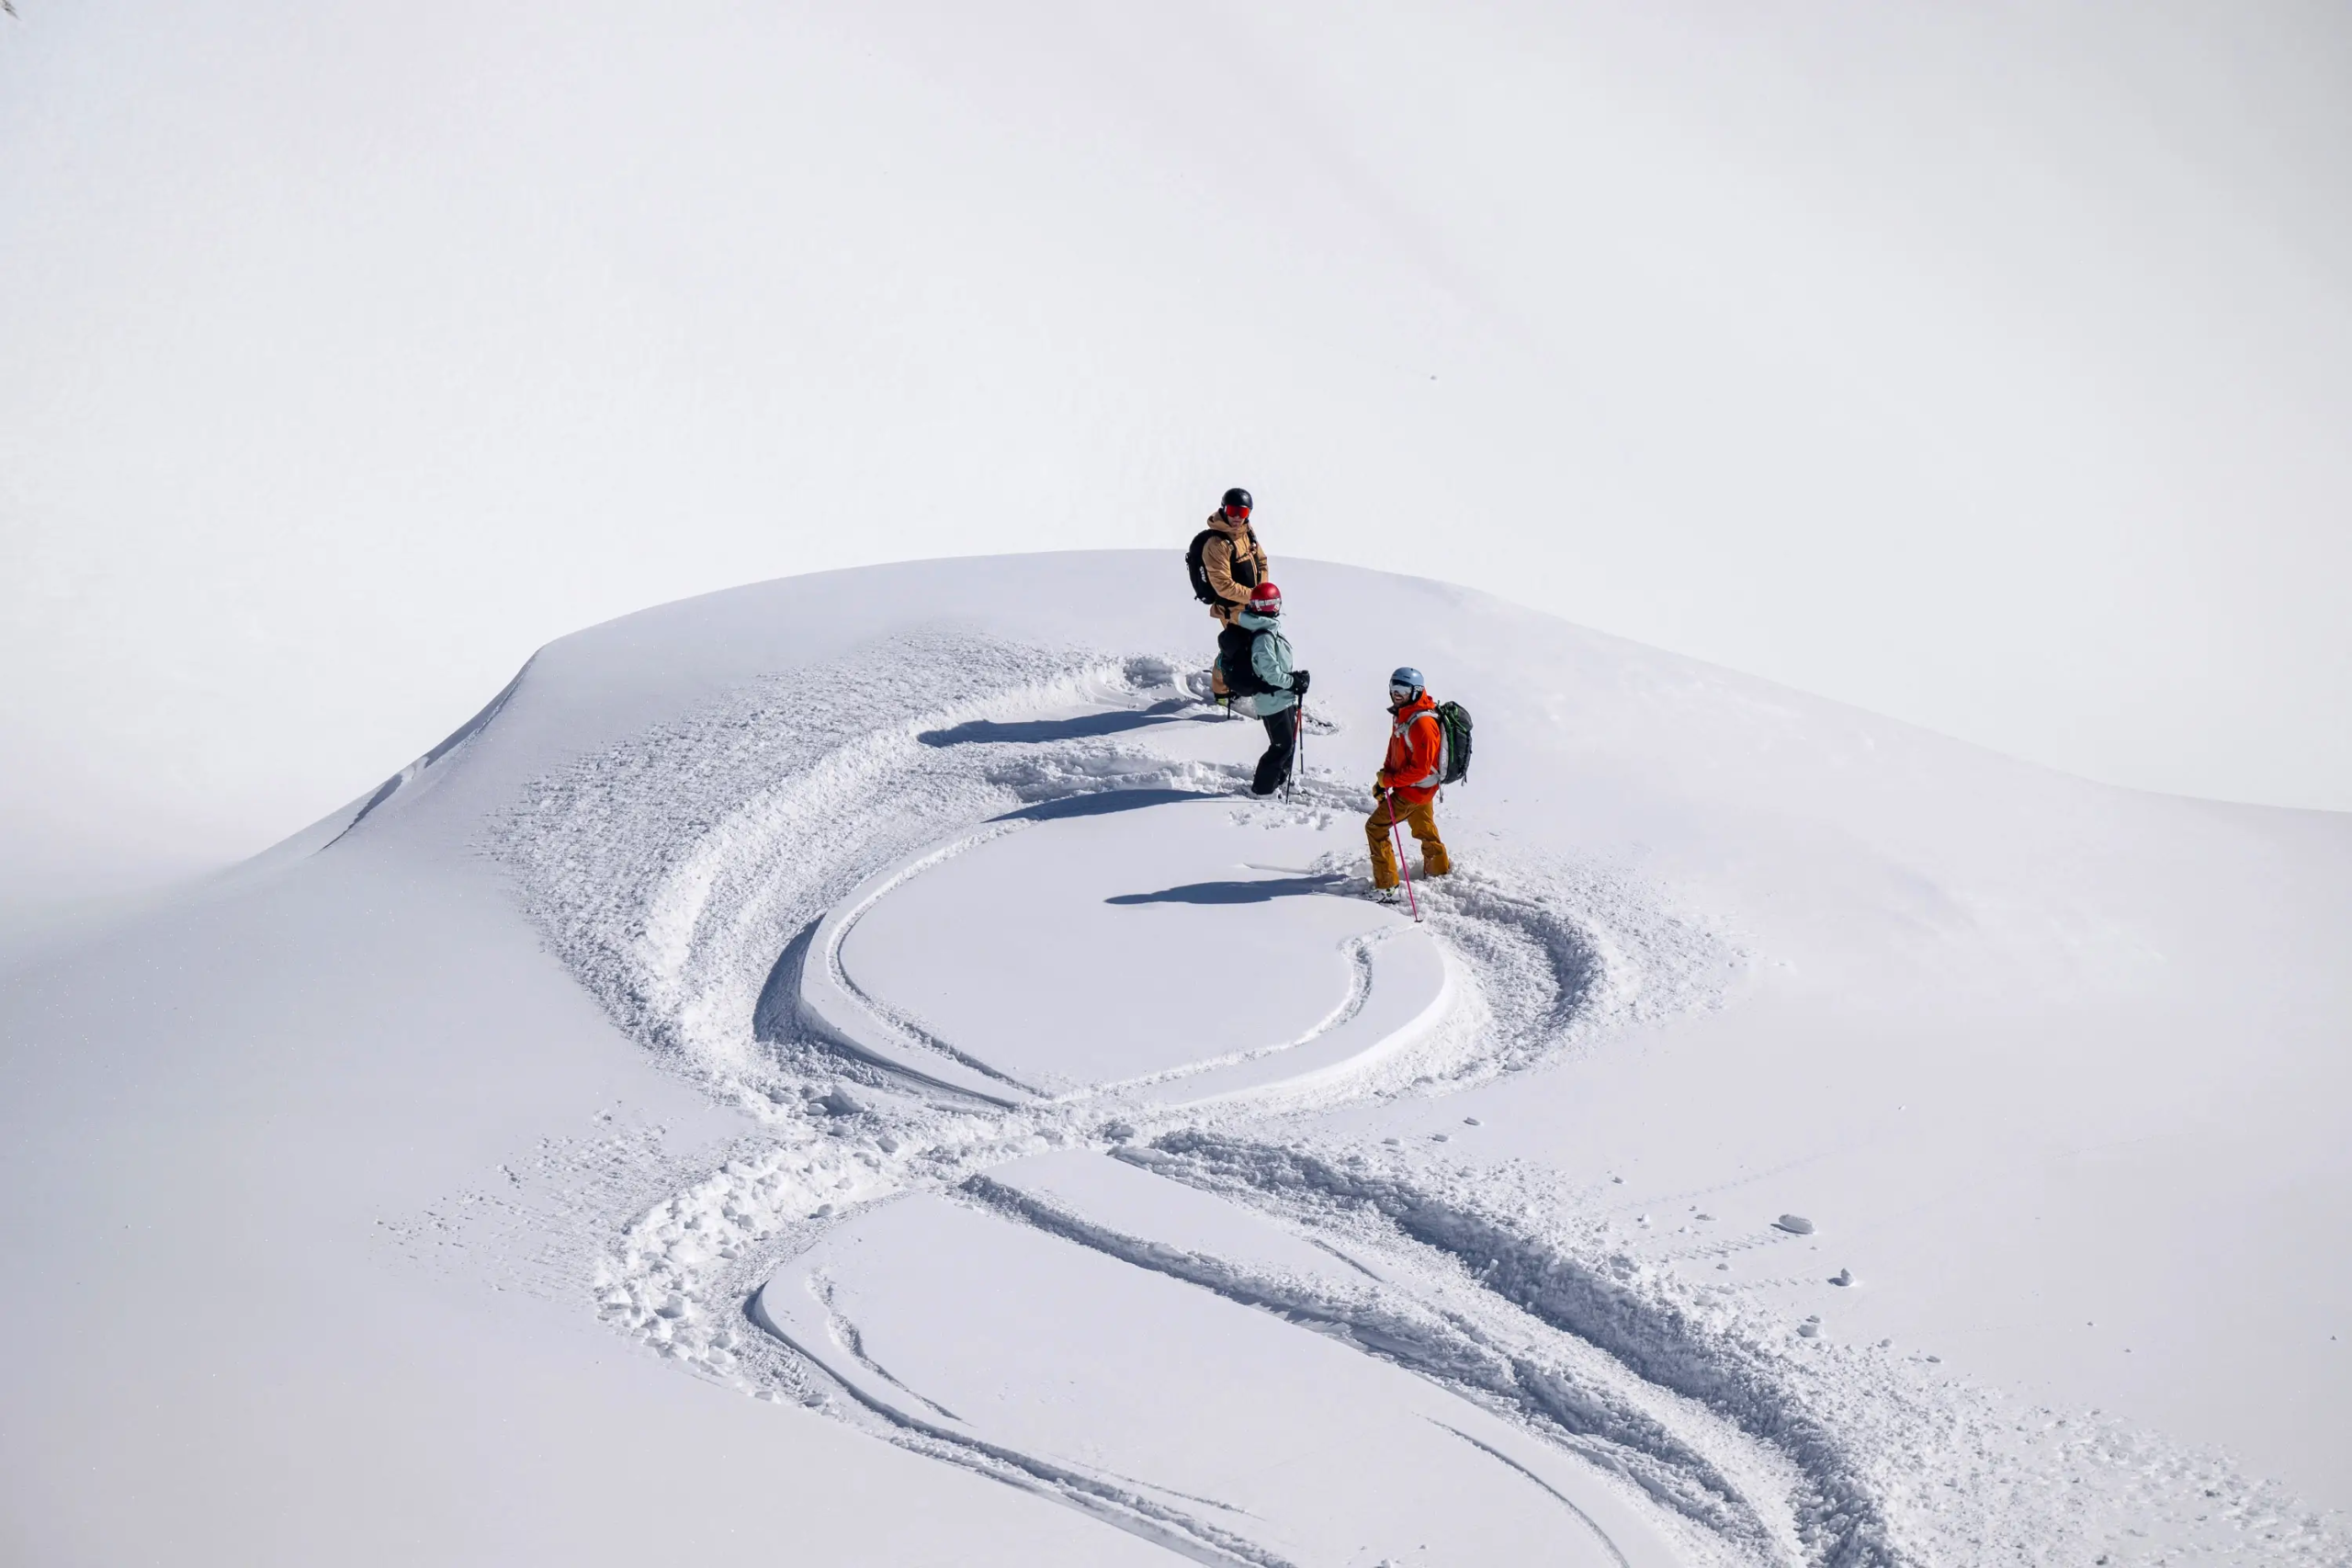 Hill skills: how to survive a whiteout